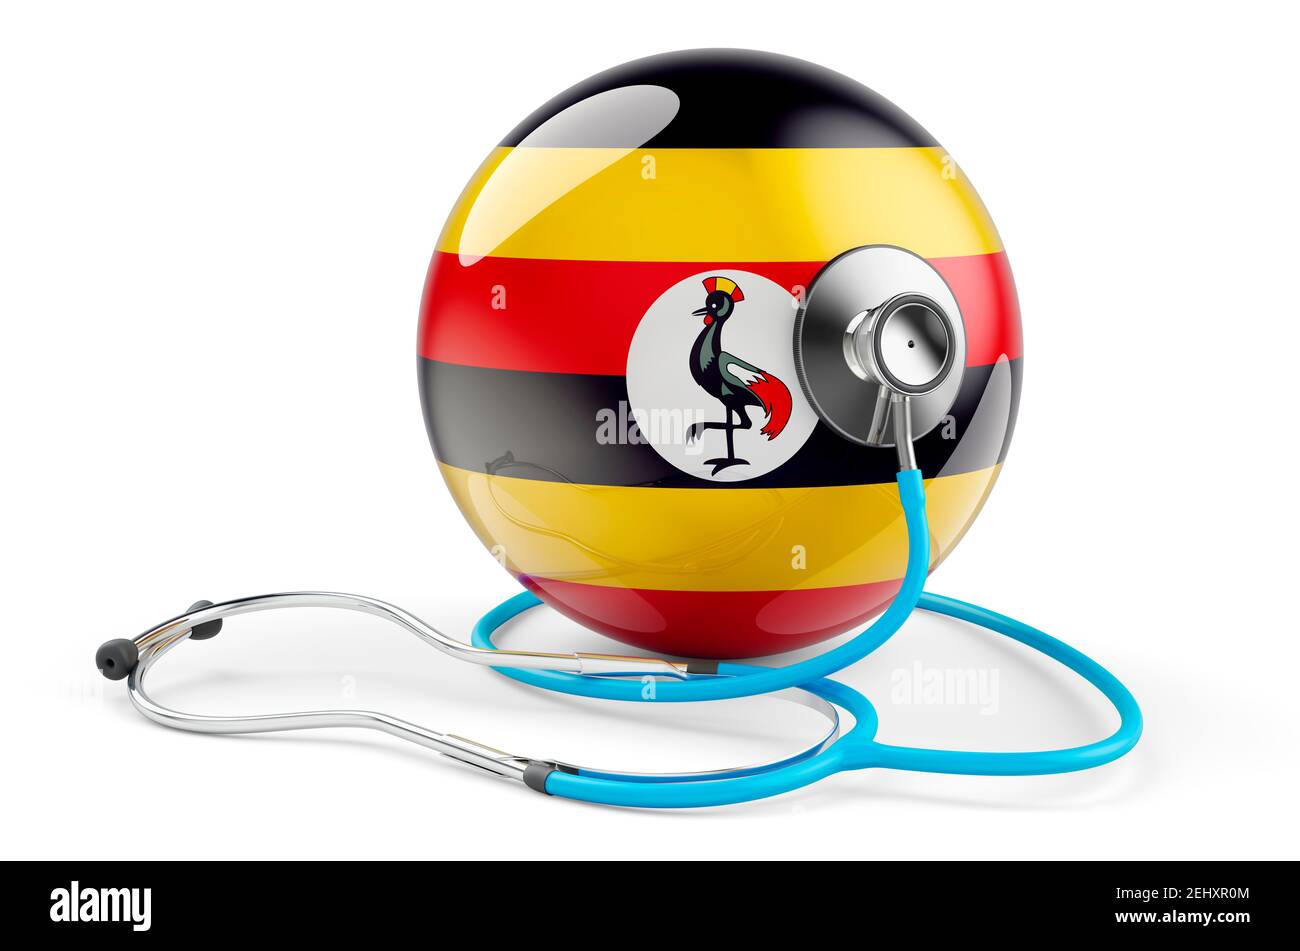 Uganda stethoscope Cut Out Stock Images & Pictures - Alamy